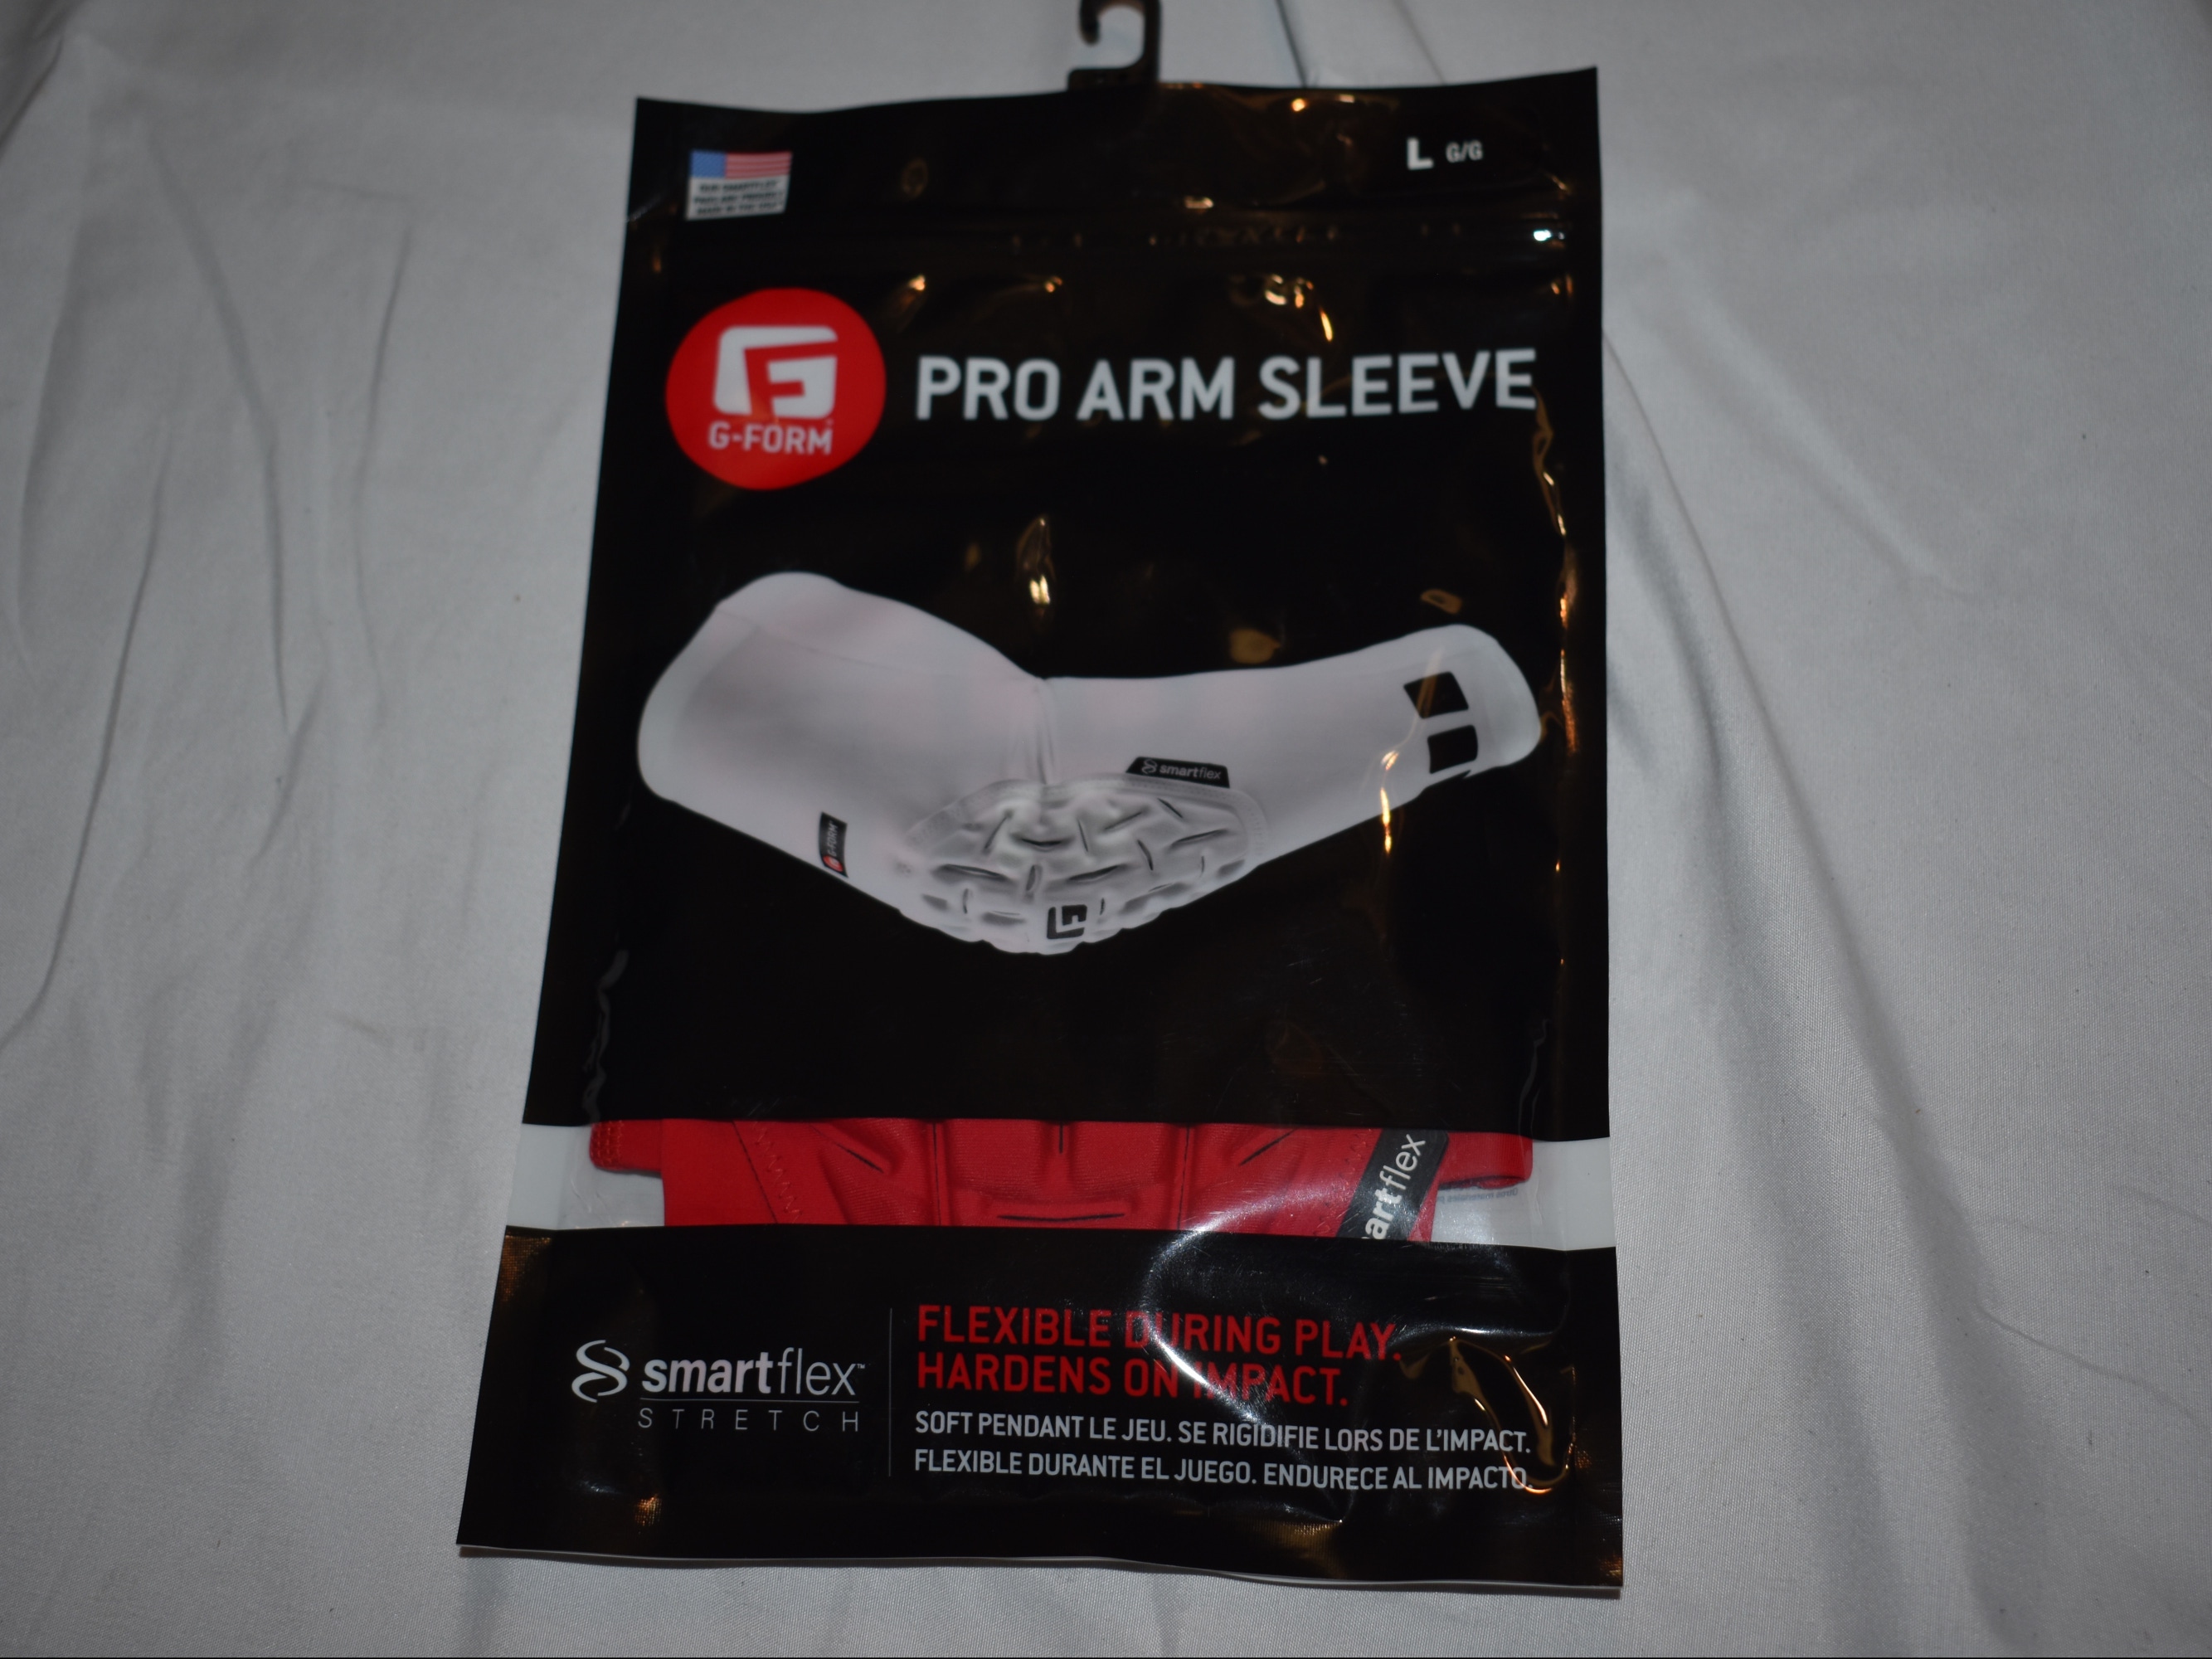 NEW - G-Form Protective Pro Arm Sleeve, Hardens on Impact, Red, Adult Large